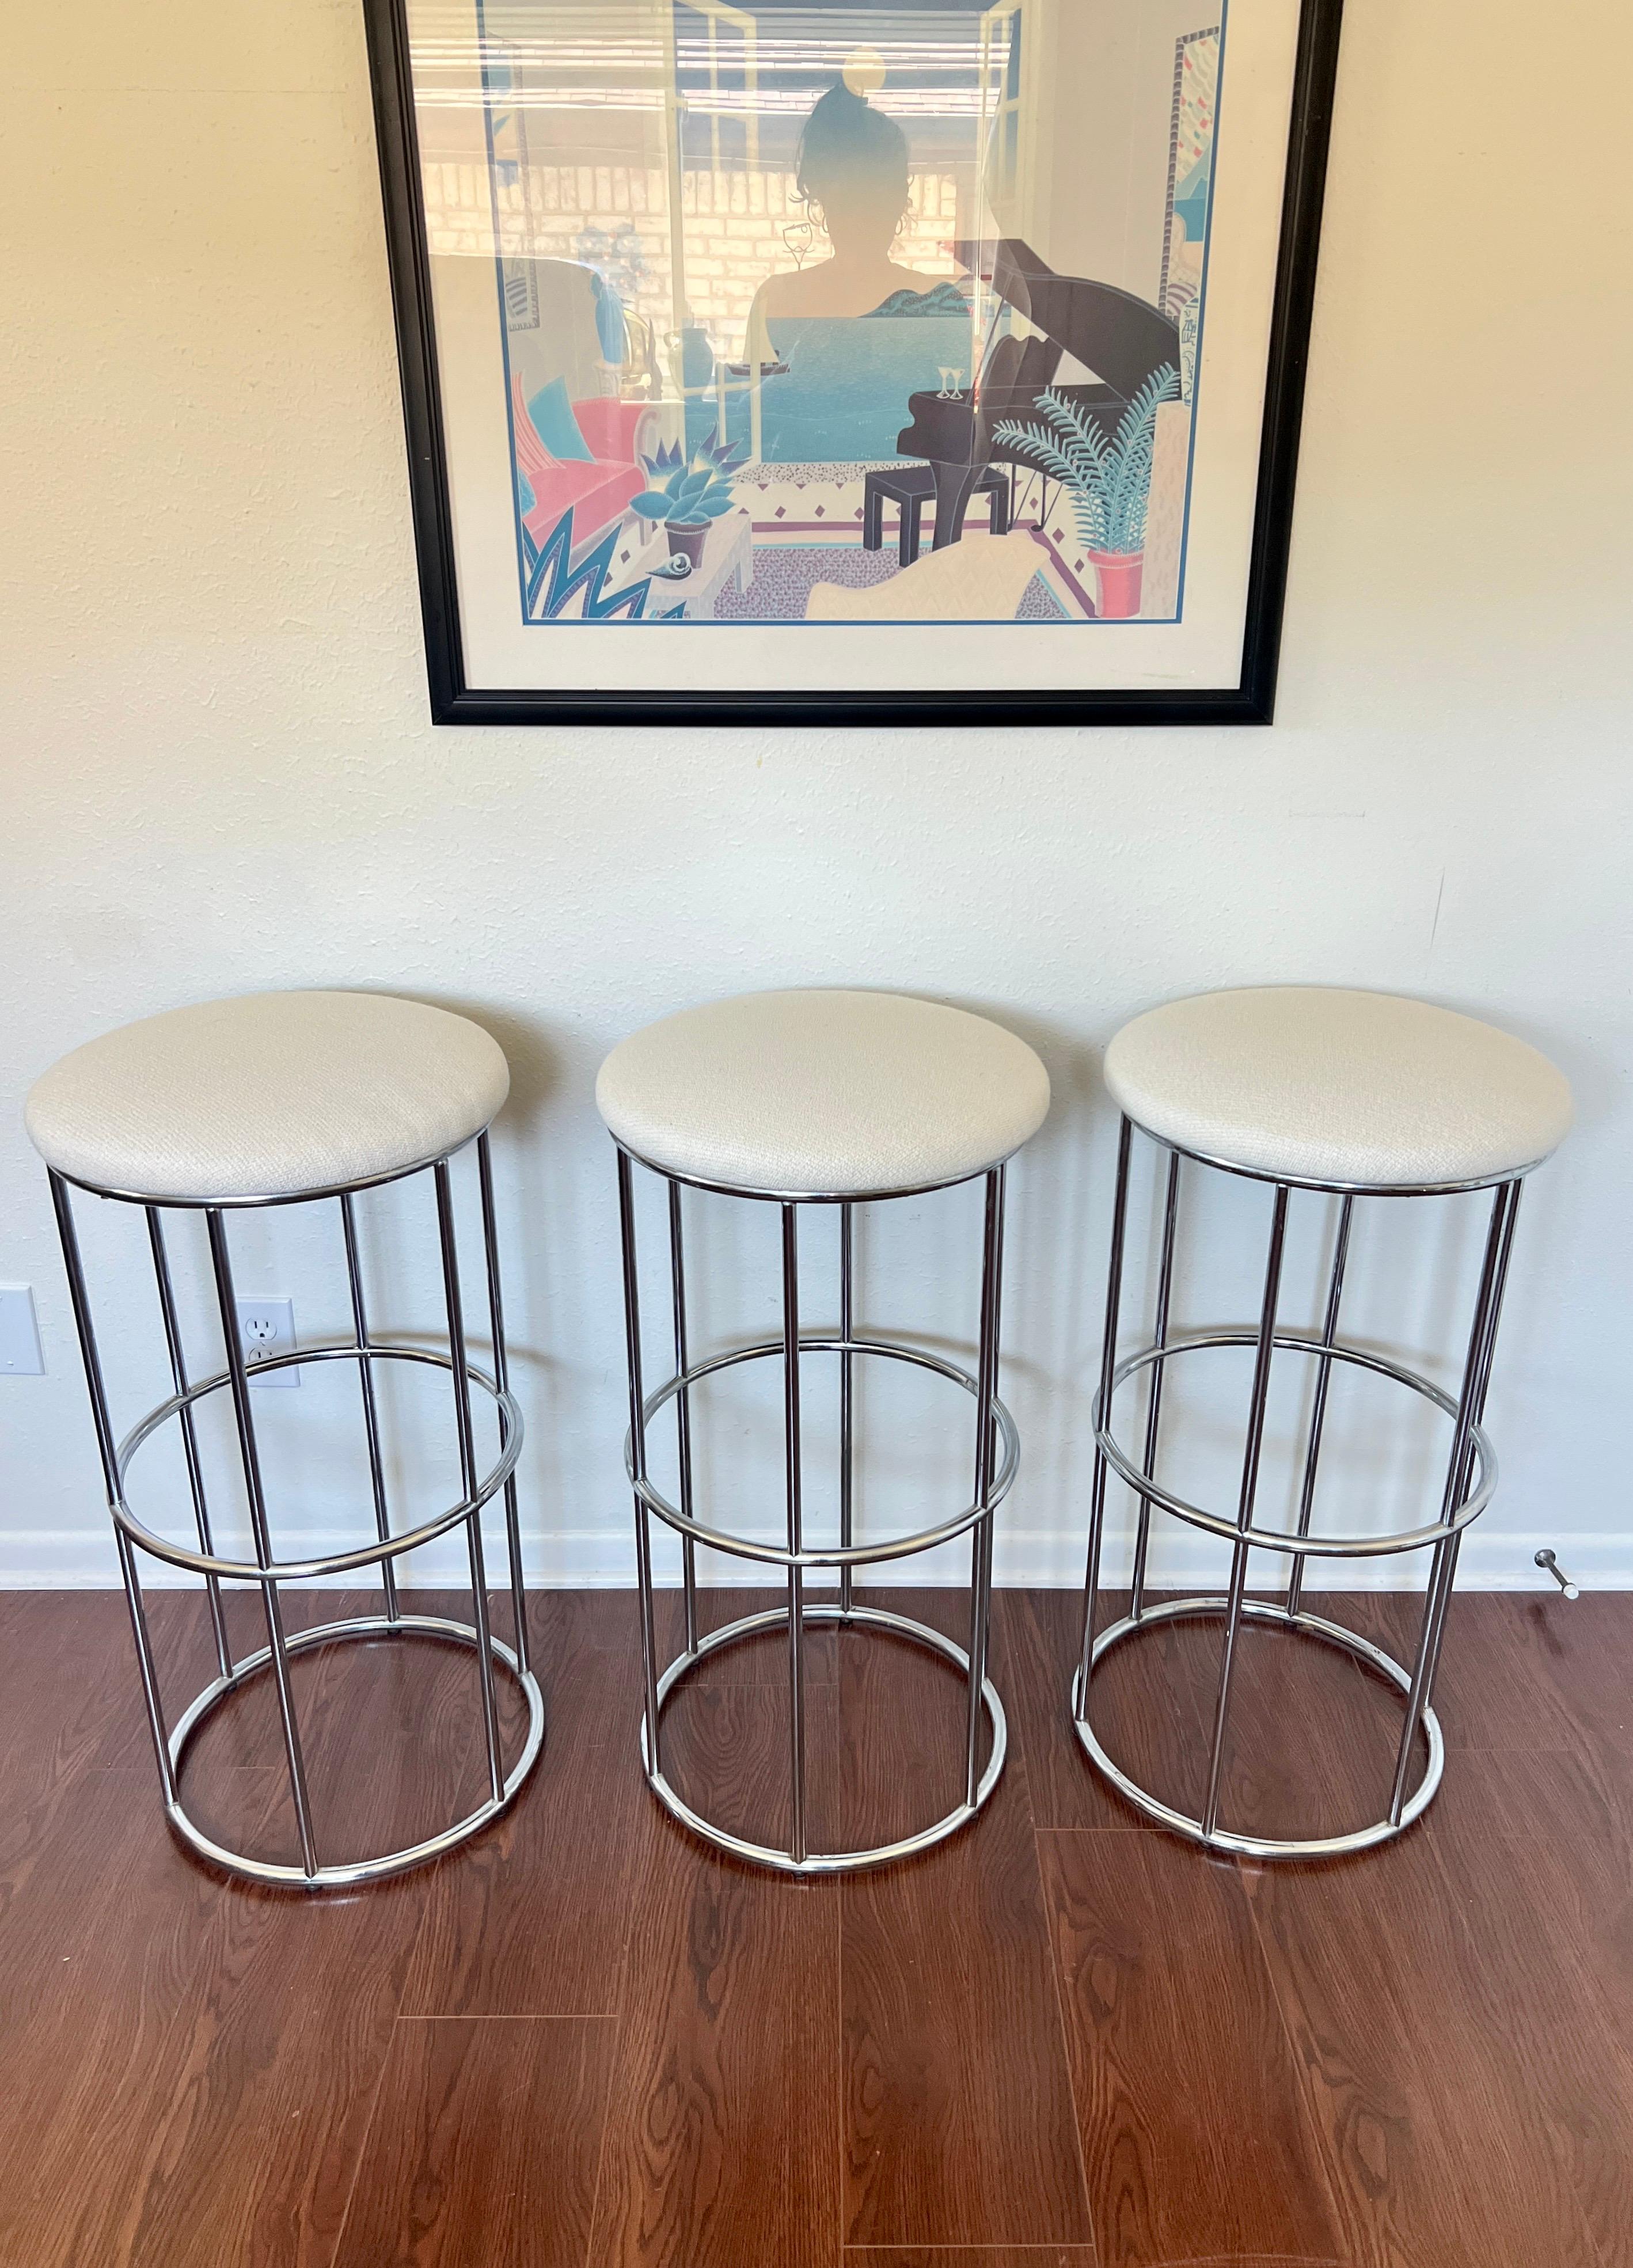 Vintage set of 3 chrome barstools newly reupholstered in an ivory boucle fabric, circa 1970s. Attributed to Milo Baughman. This minimalist design goes with any modern interior. Overall in excellent condition.

30” H x 16” W